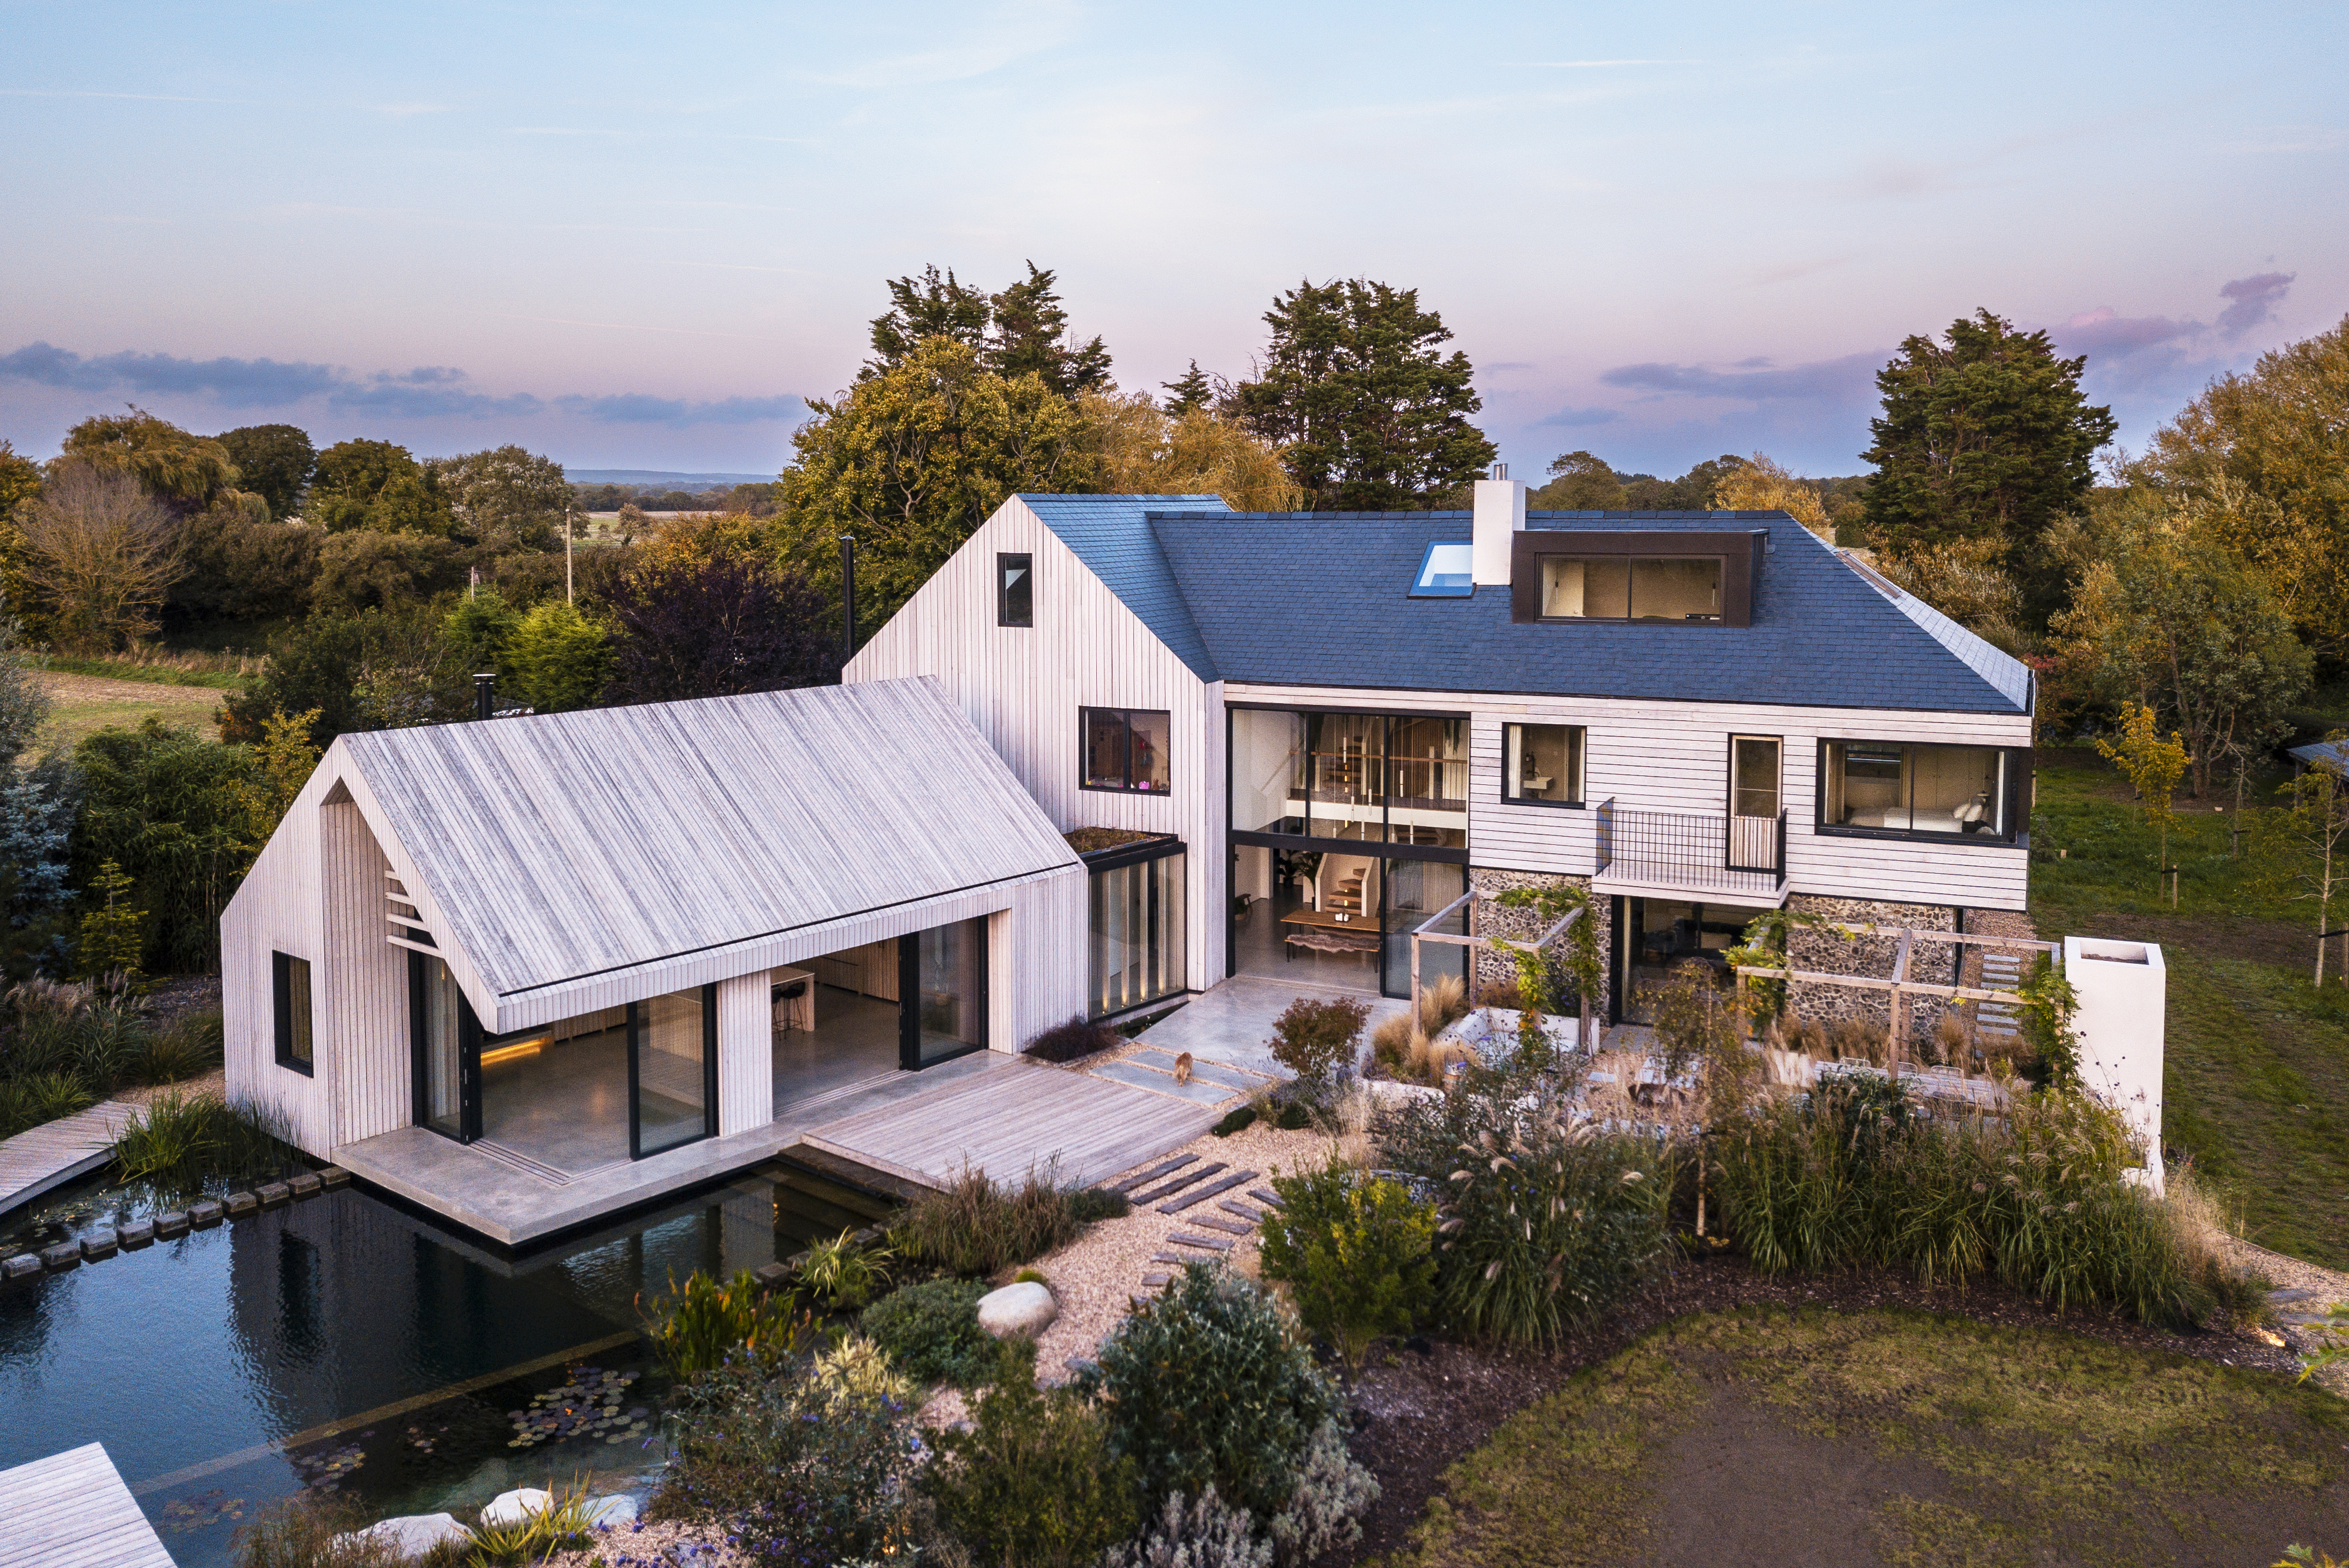 From a Natural Pool to Natural Slate: Cupa 12 selected for Beautiful GRAND DESIGNS PROJECT